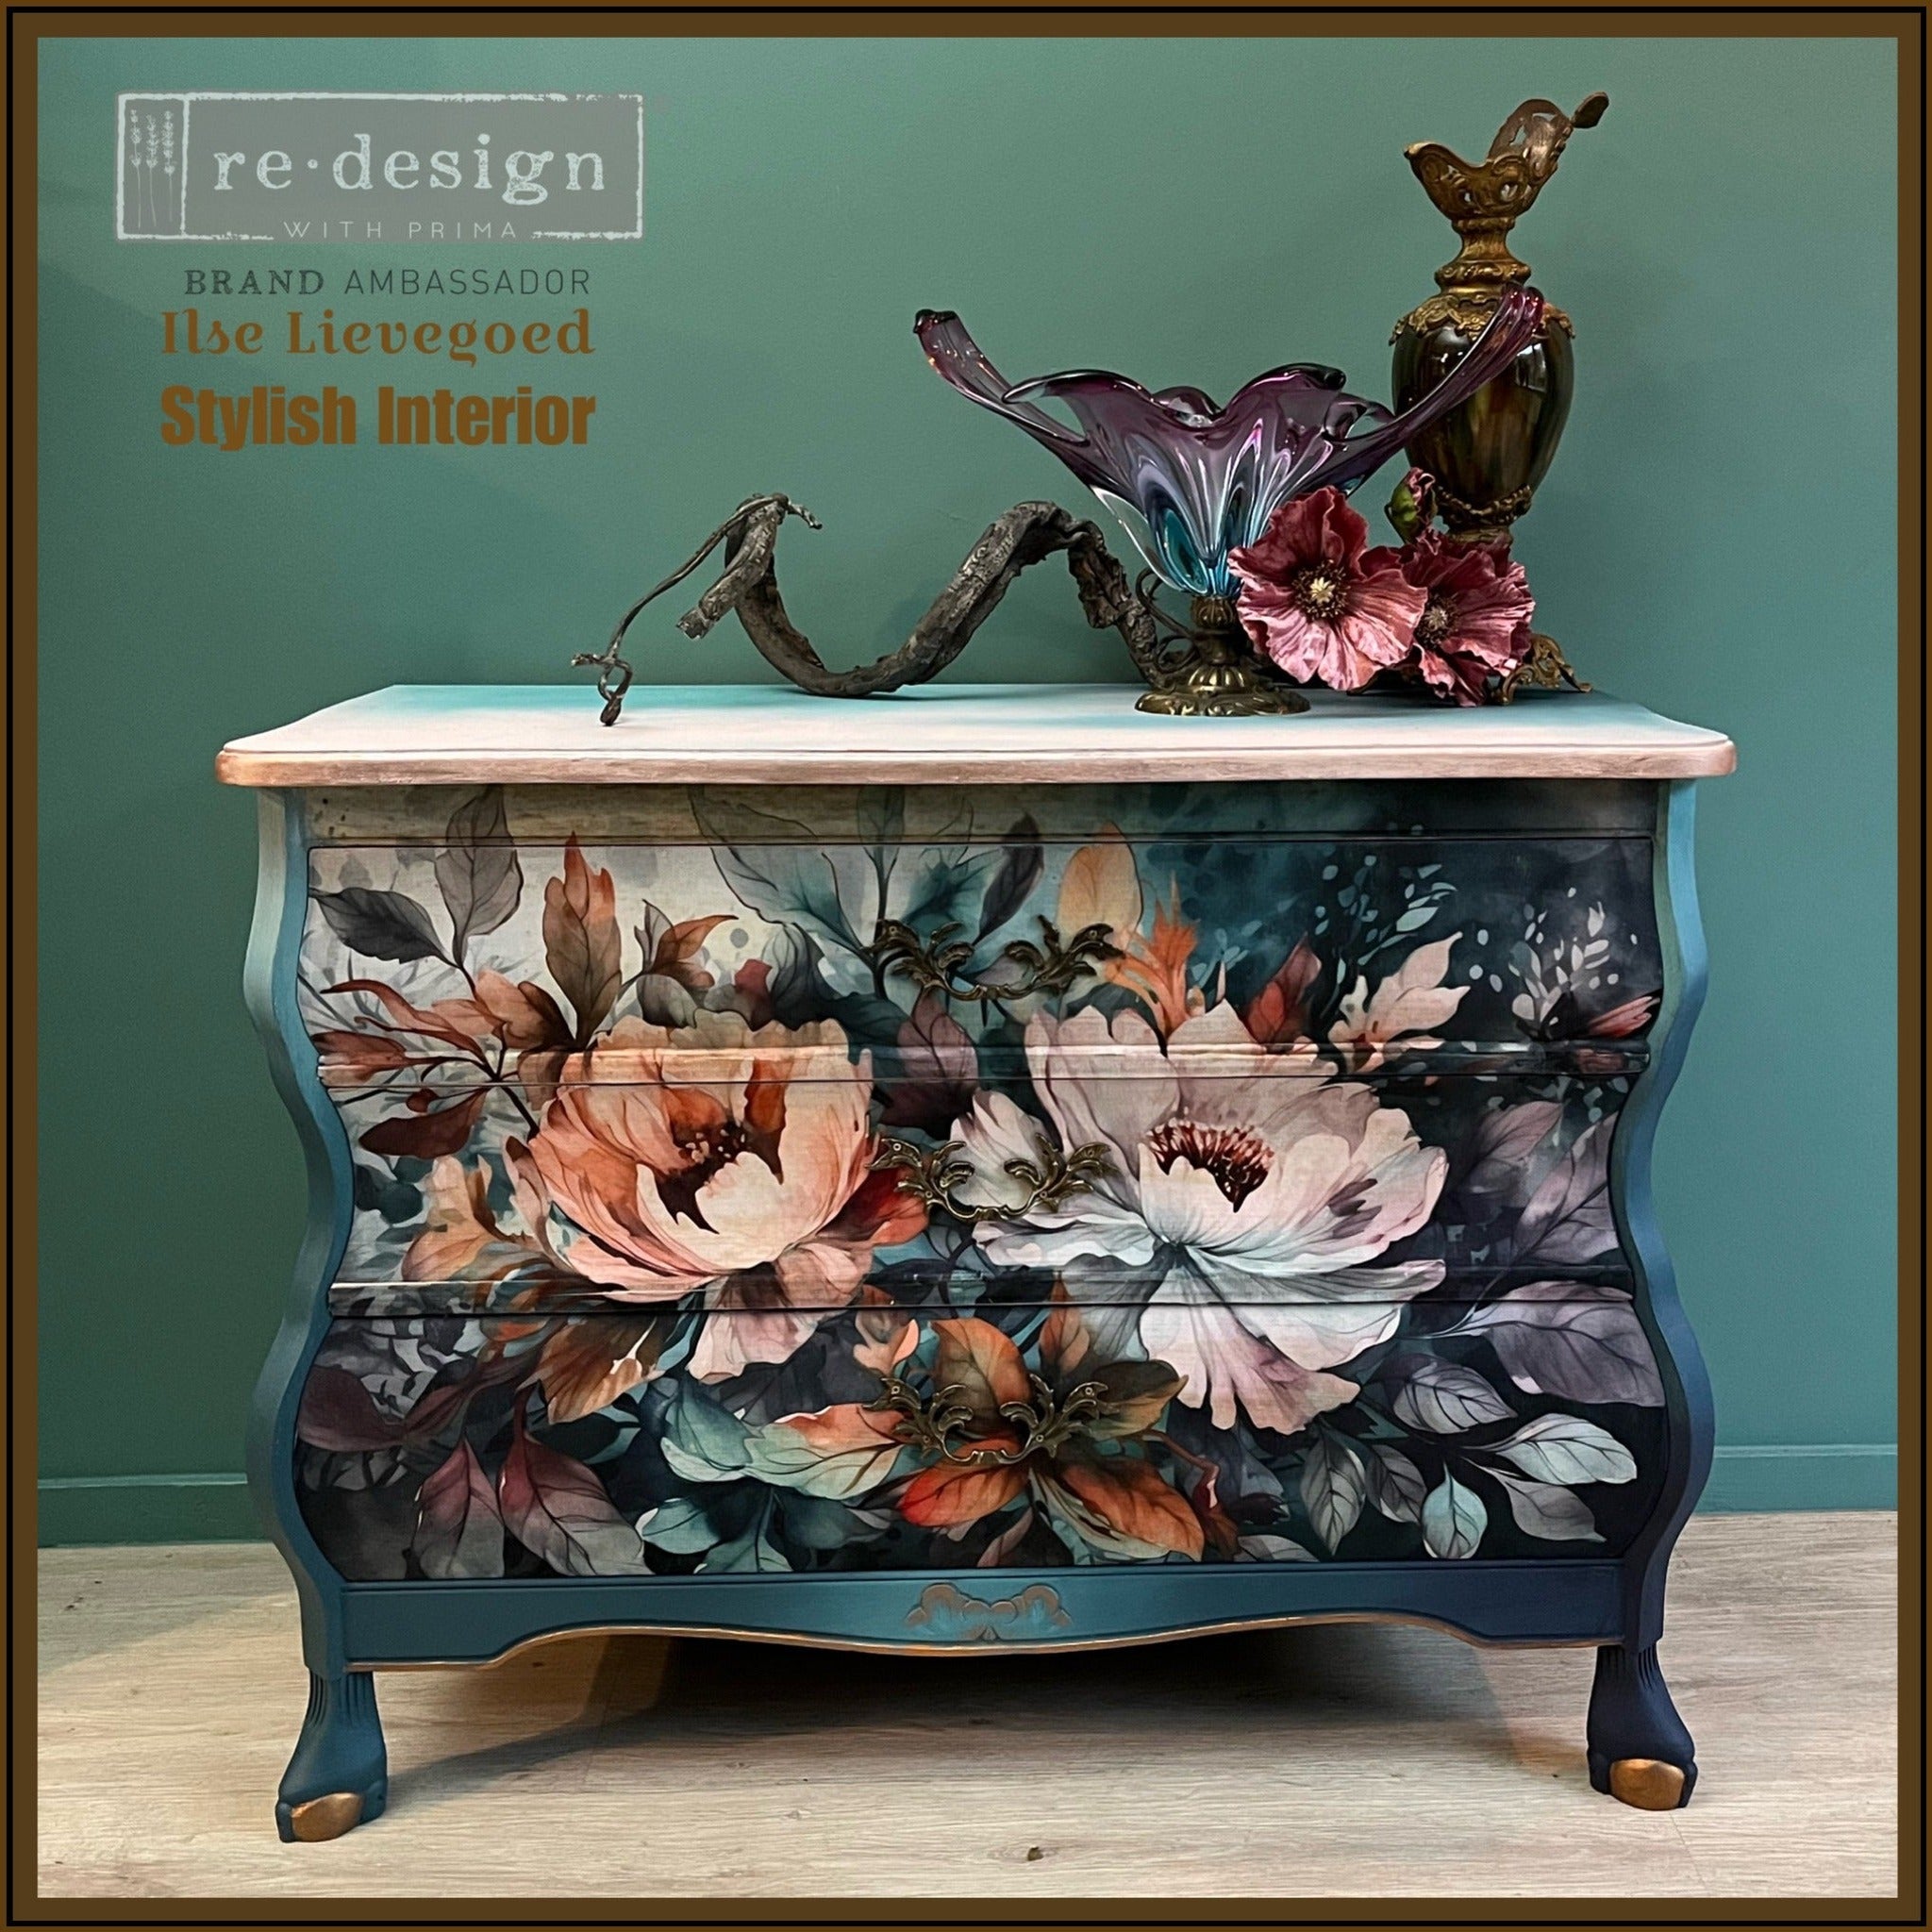 A vintage dresser refurbished by Ilse Lievegoed Stylish Interior is painted dark teal blue with natural light wood accents and features ReDesign with Prima's Floral Dream A1 fiber paper on its 3 drawers.